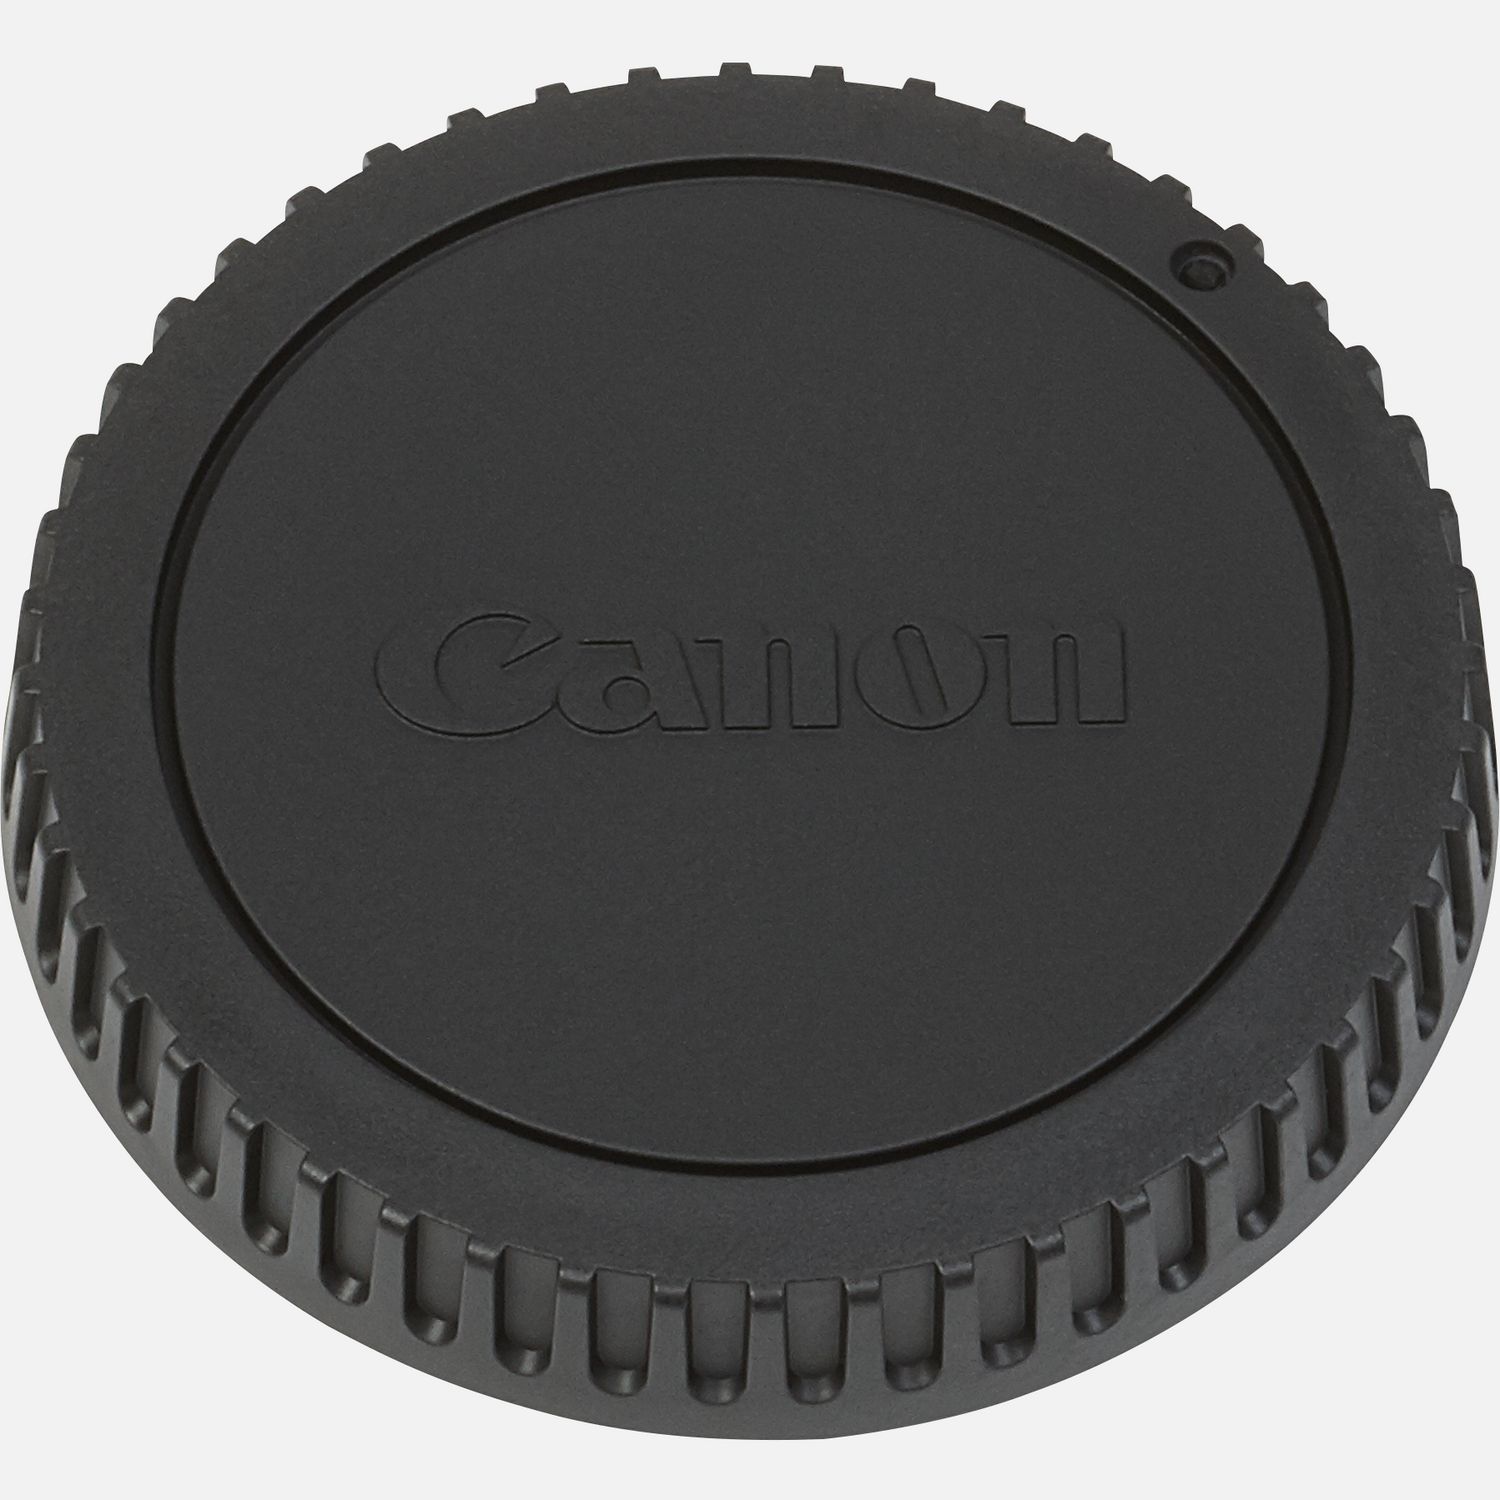 NEW CORD UK Stock KOOD 86mm CENTRE PINCH GRIP STYLE LENS CAP COVER for 86mm 